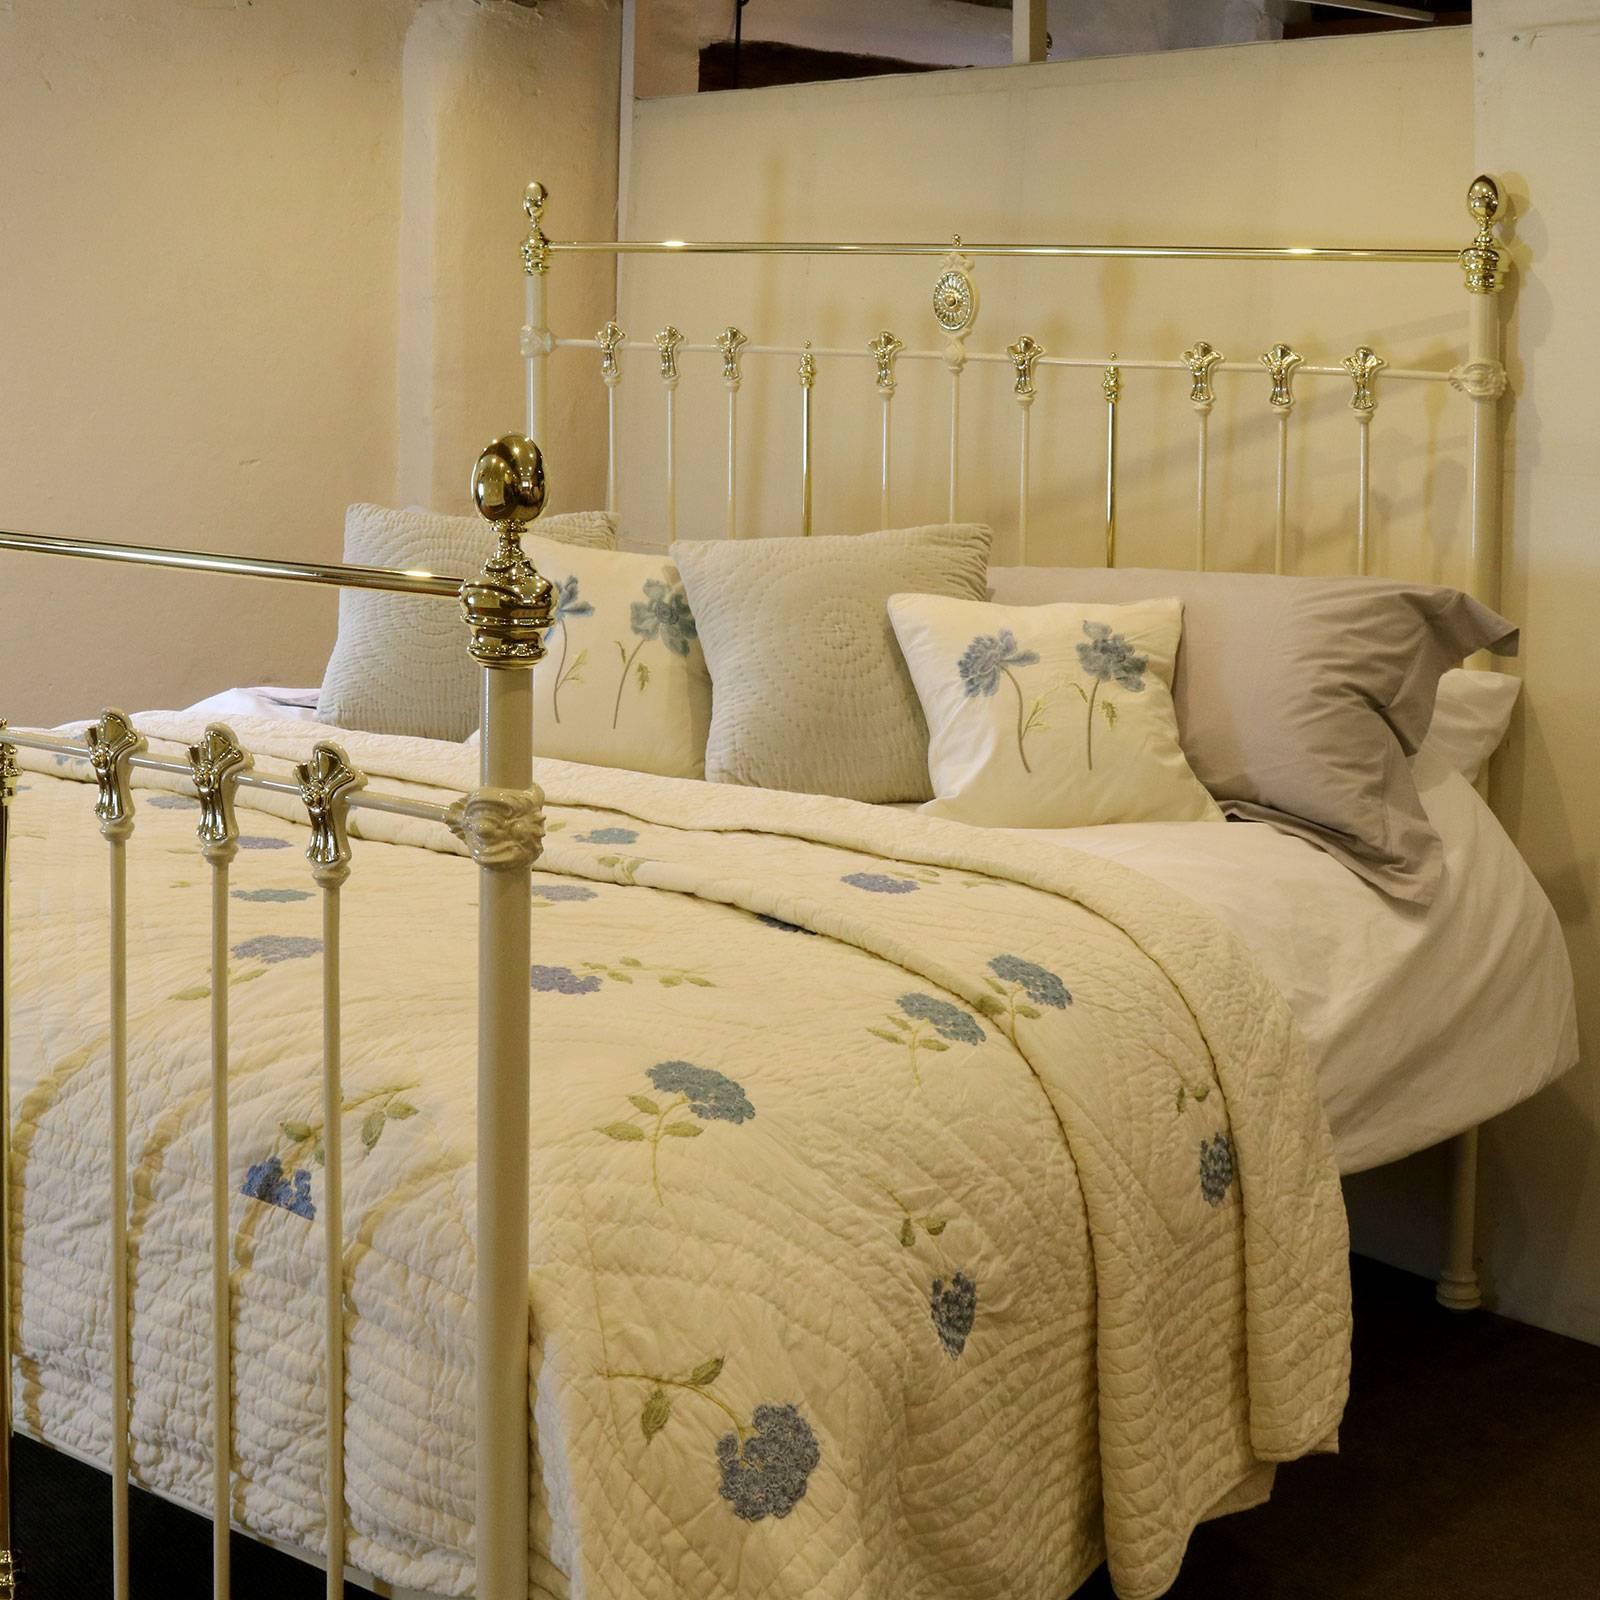 A fine decorative brass and iron bed adapted from an original Victorian frame, circa 1890.

This bed accepts a British super king or Californian king, 72 inches wide (6ft or 180cm).

The price is for the bed frame alone. The base, mattress,